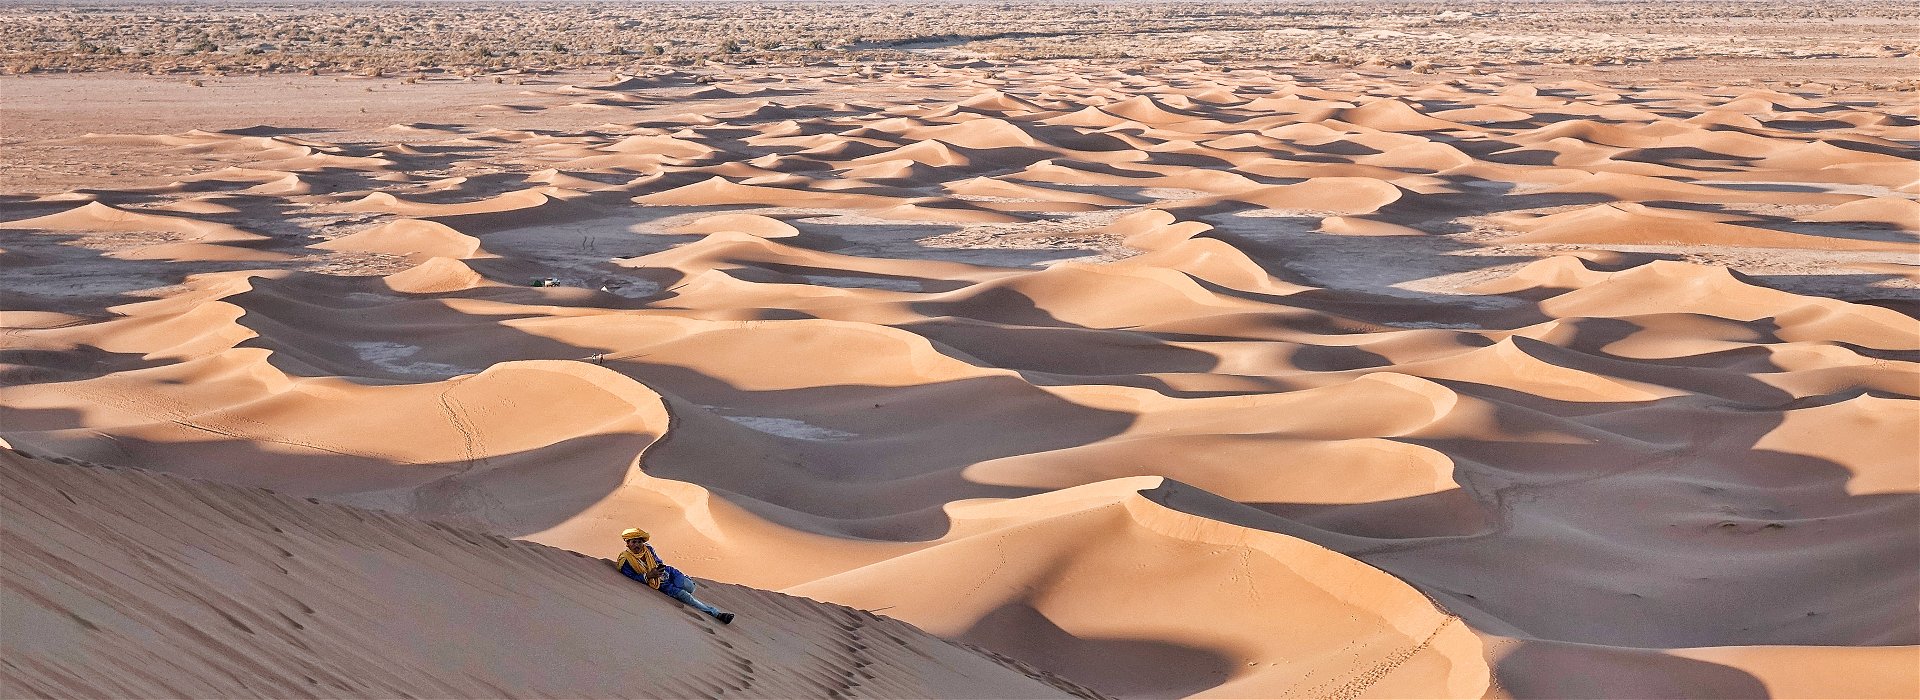 7 of the greatest desert destinations on Earth 